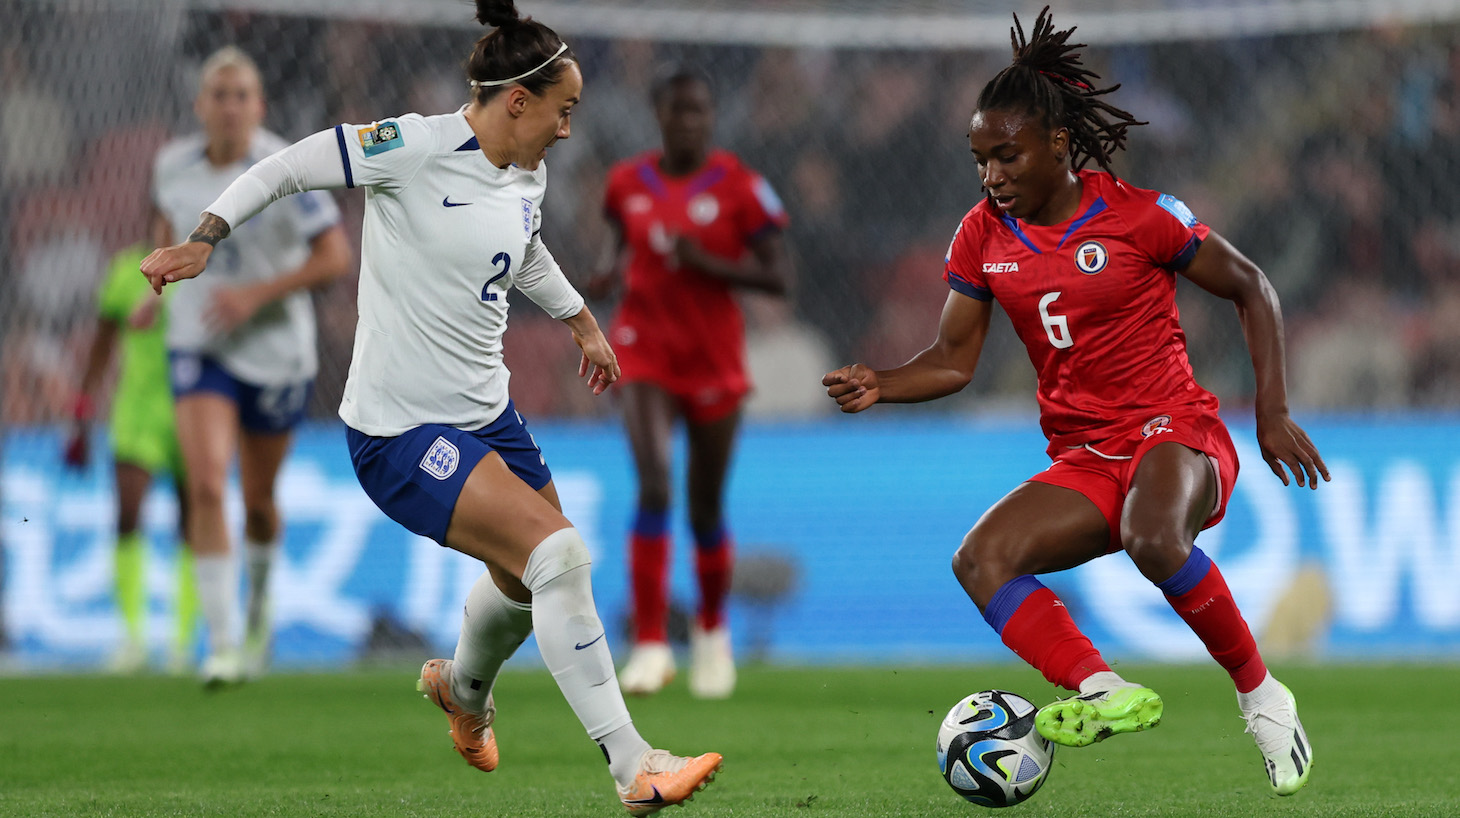 Lucy Bronze of England battles for possession with Melchie Dumornay of Haiti during the FIFA Women's World Cup Australia &amp; New Zealand 2023 Group D match between England and Haiti at Brisbane Stadium on July 22, 2023 in Brisbane / Meaanjin, Australia.